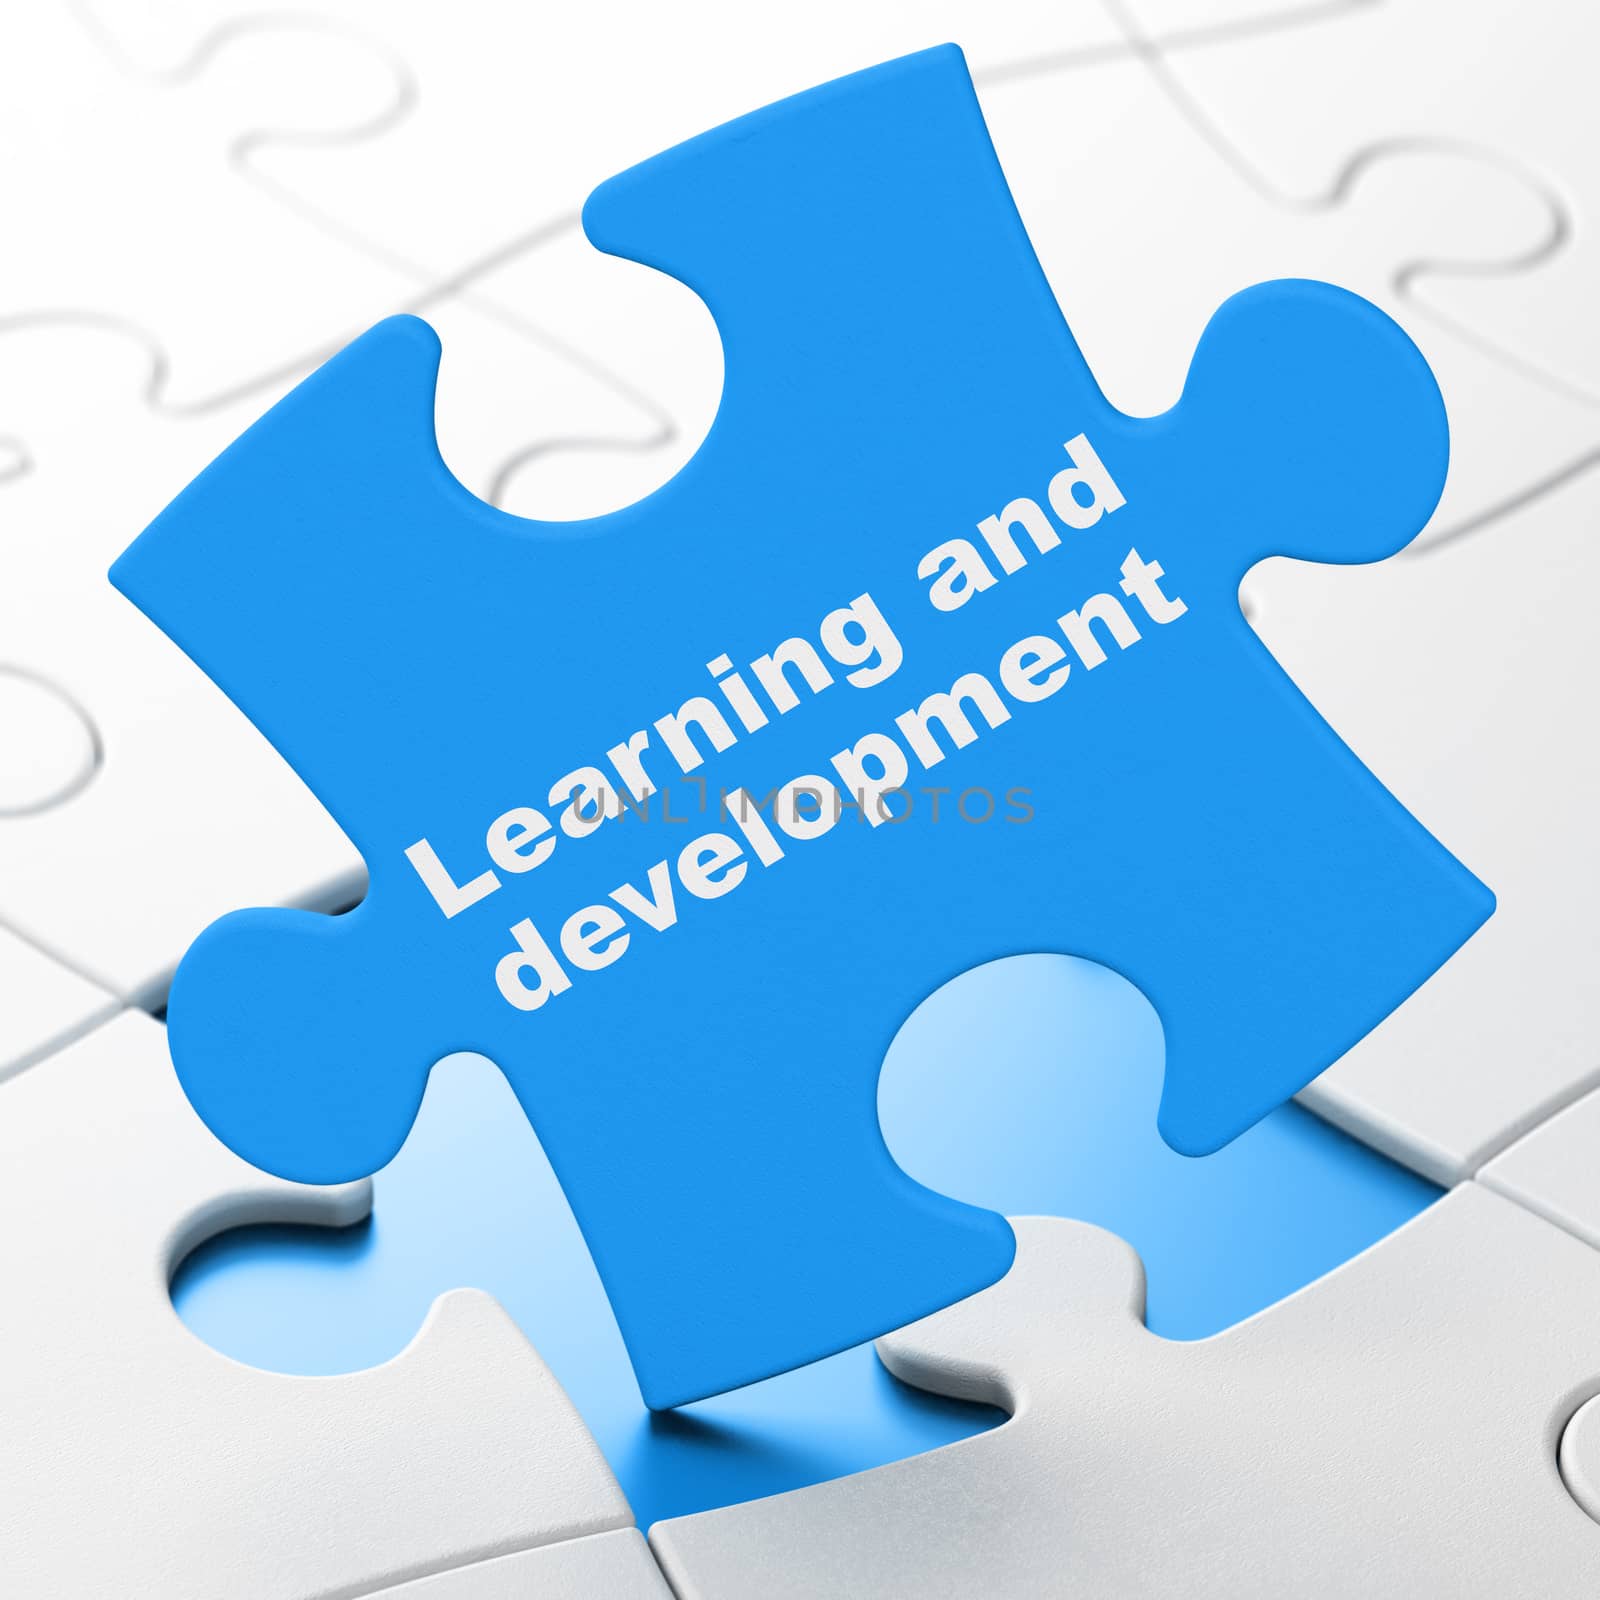 Education concept: Learning And Development on Blue puzzle pieces background, 3D rendering